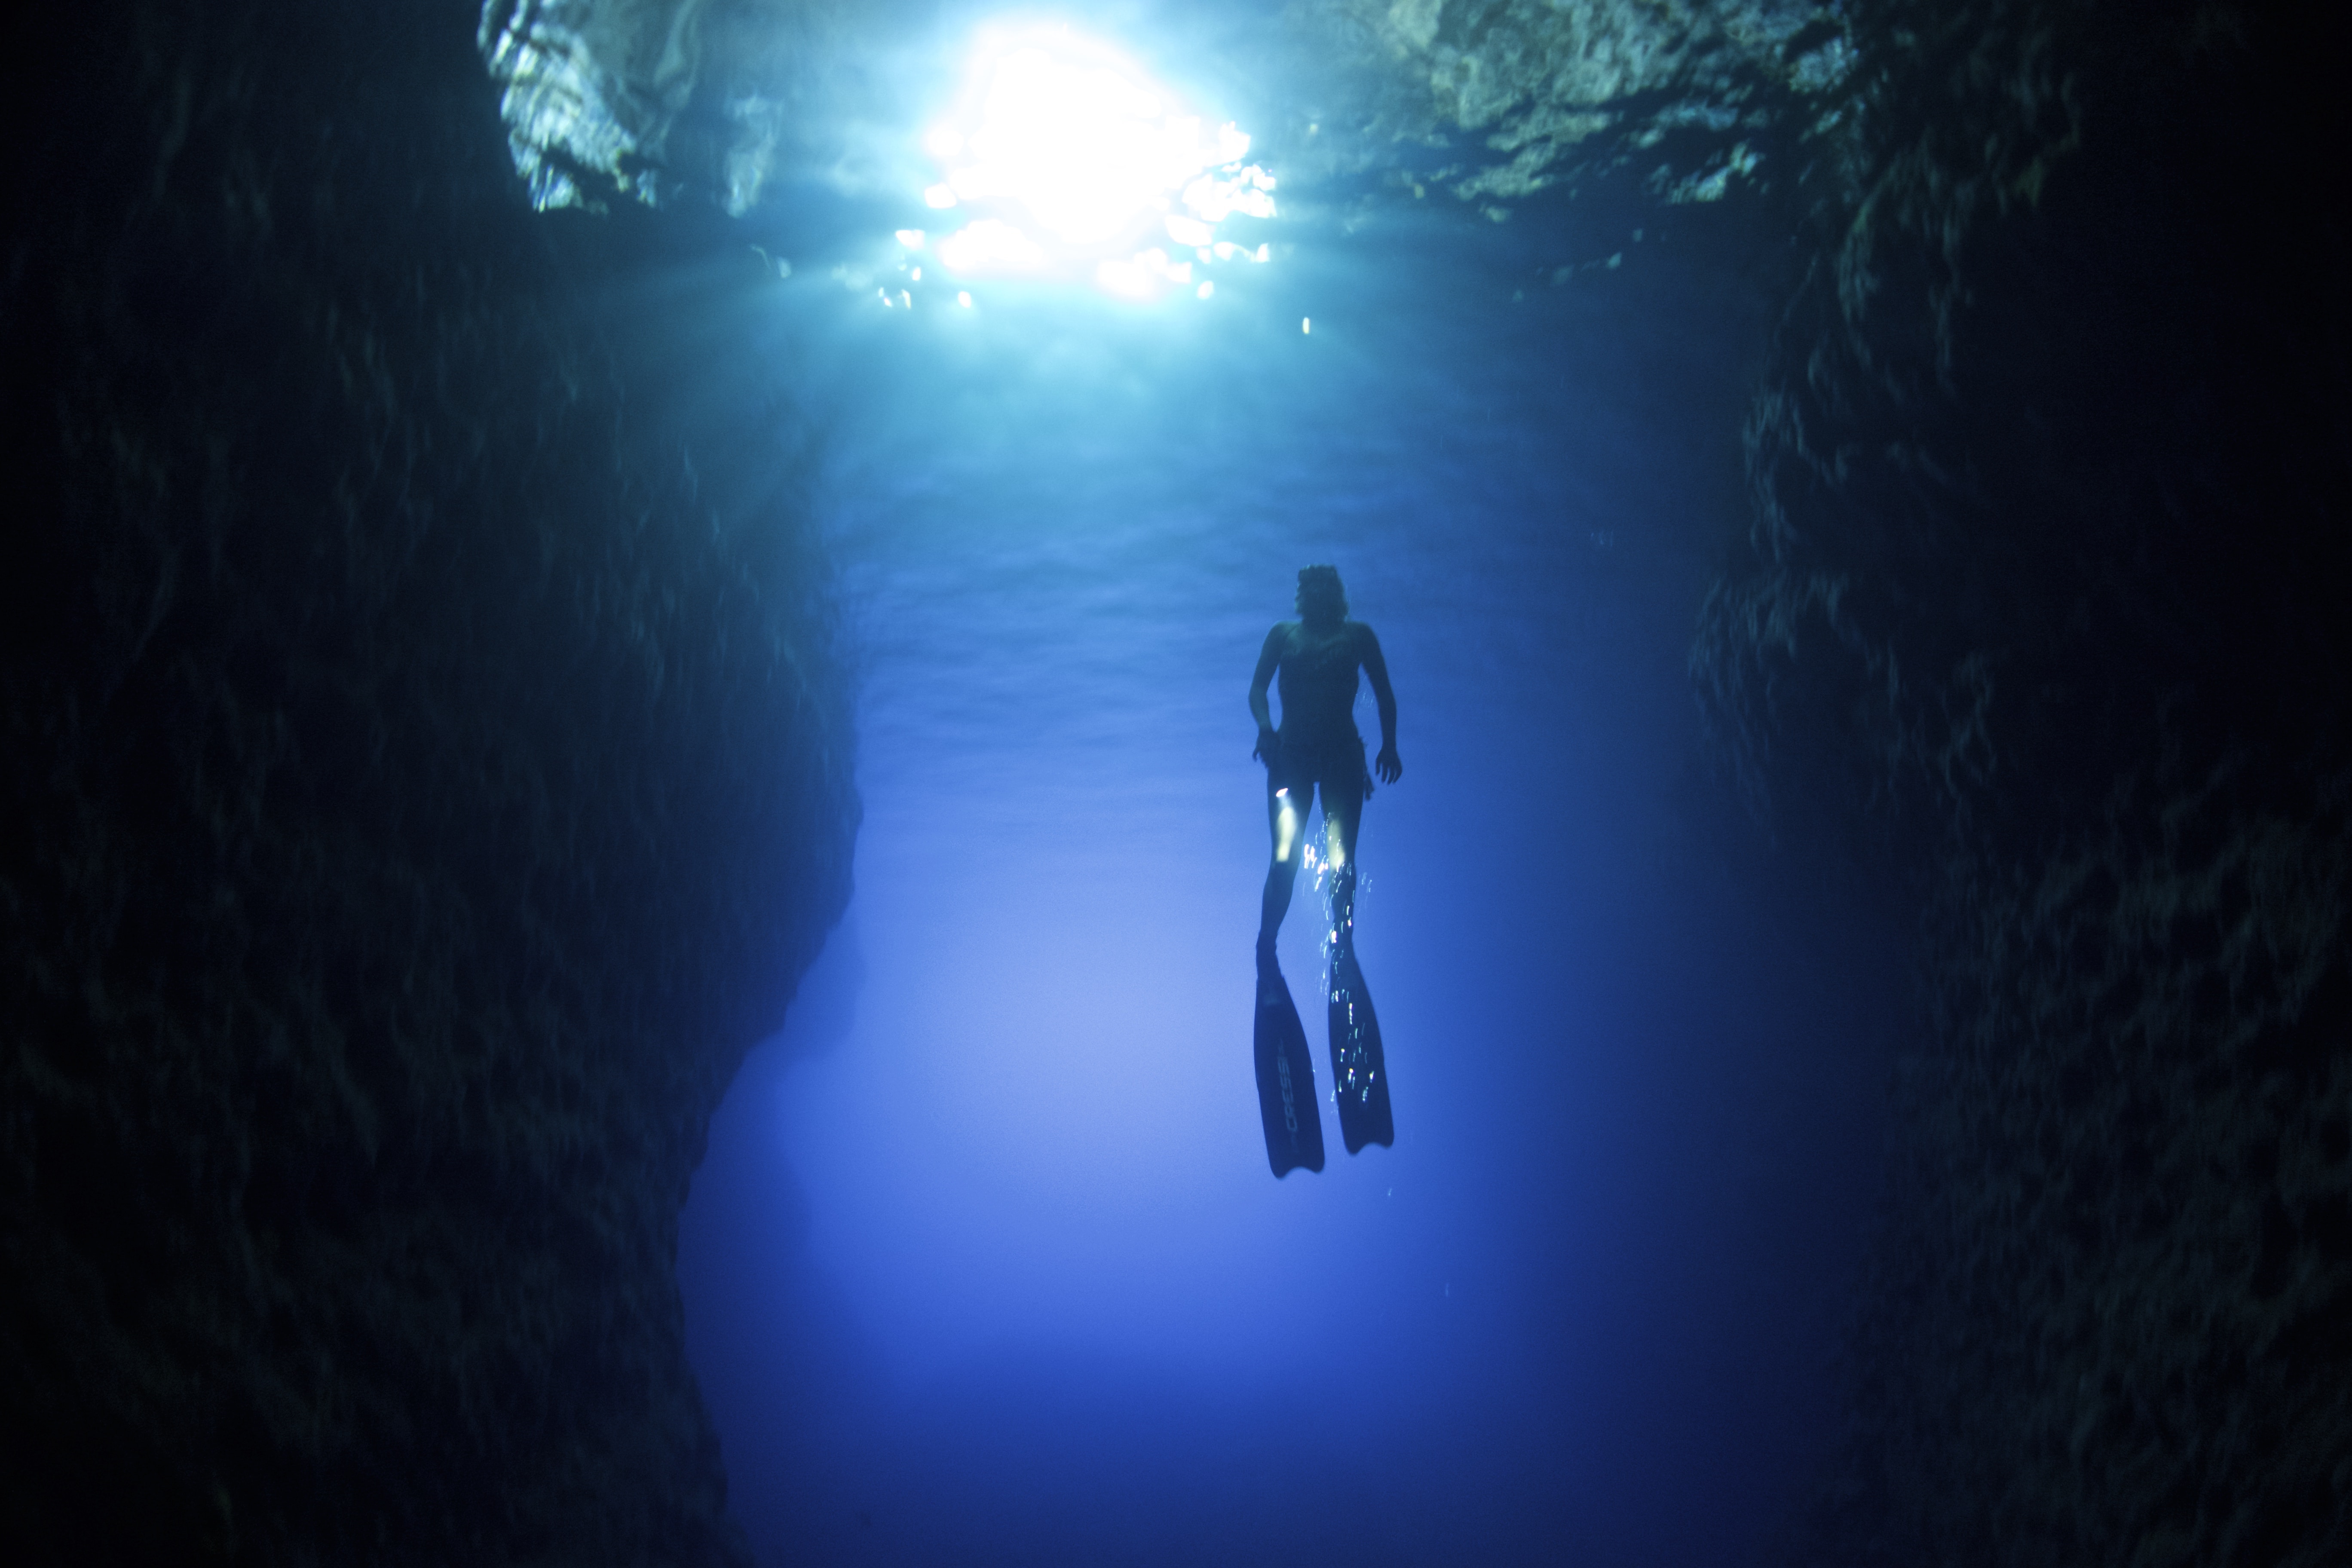 Underwater Caves Wallpapers High Quality | Download Free